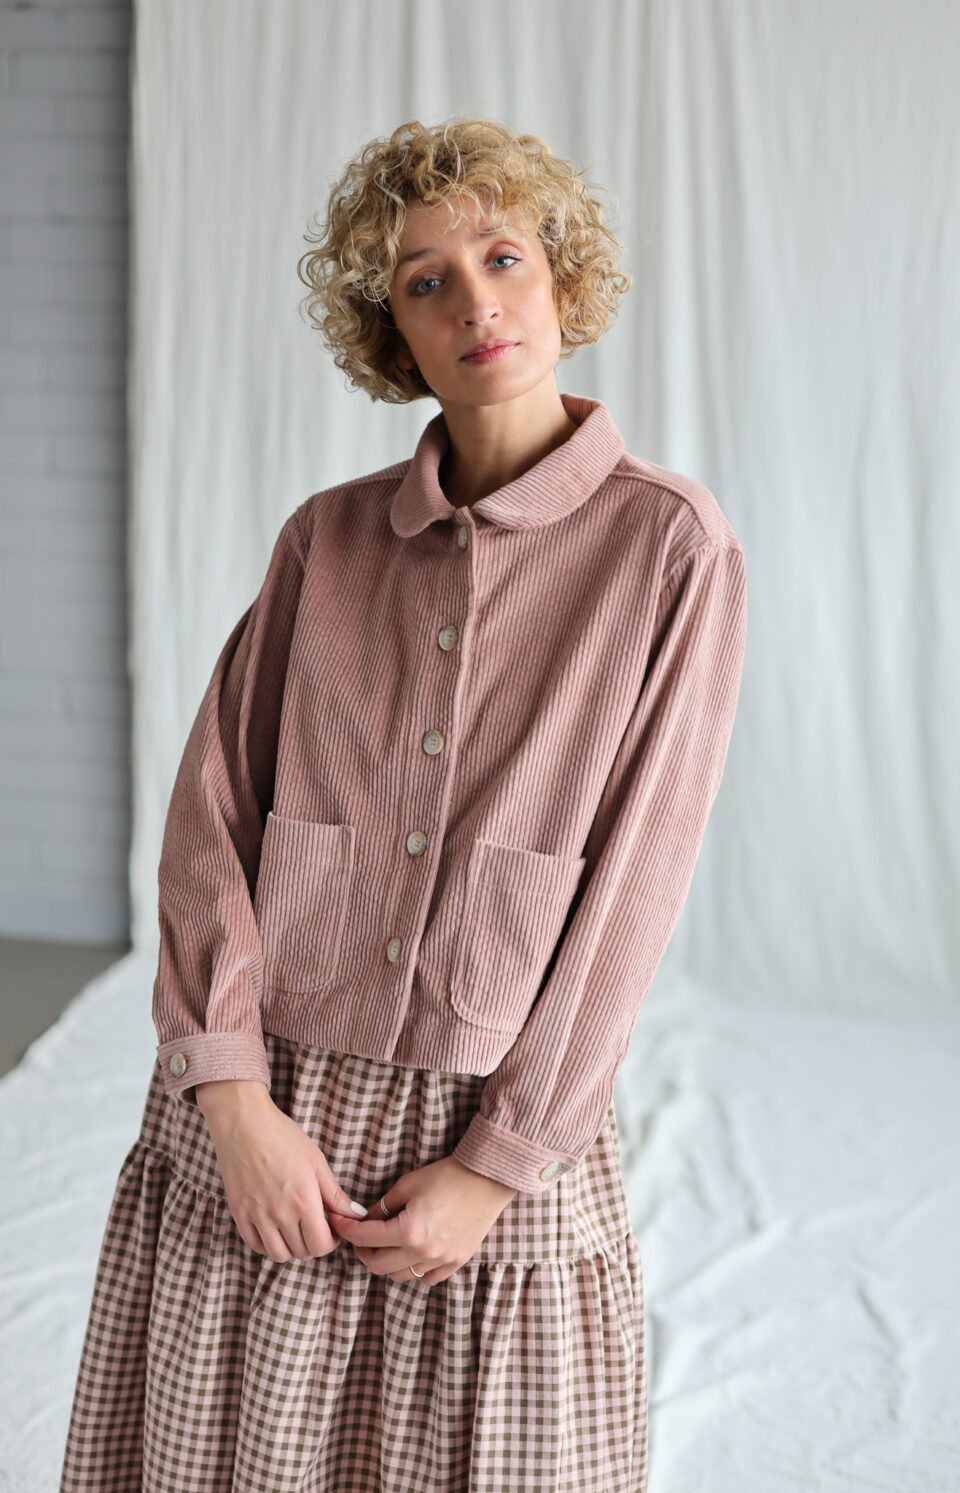 Wide wale cord Peter pan collar boxy jacket | Jacket | Sustainable clothing | OffOn clothing